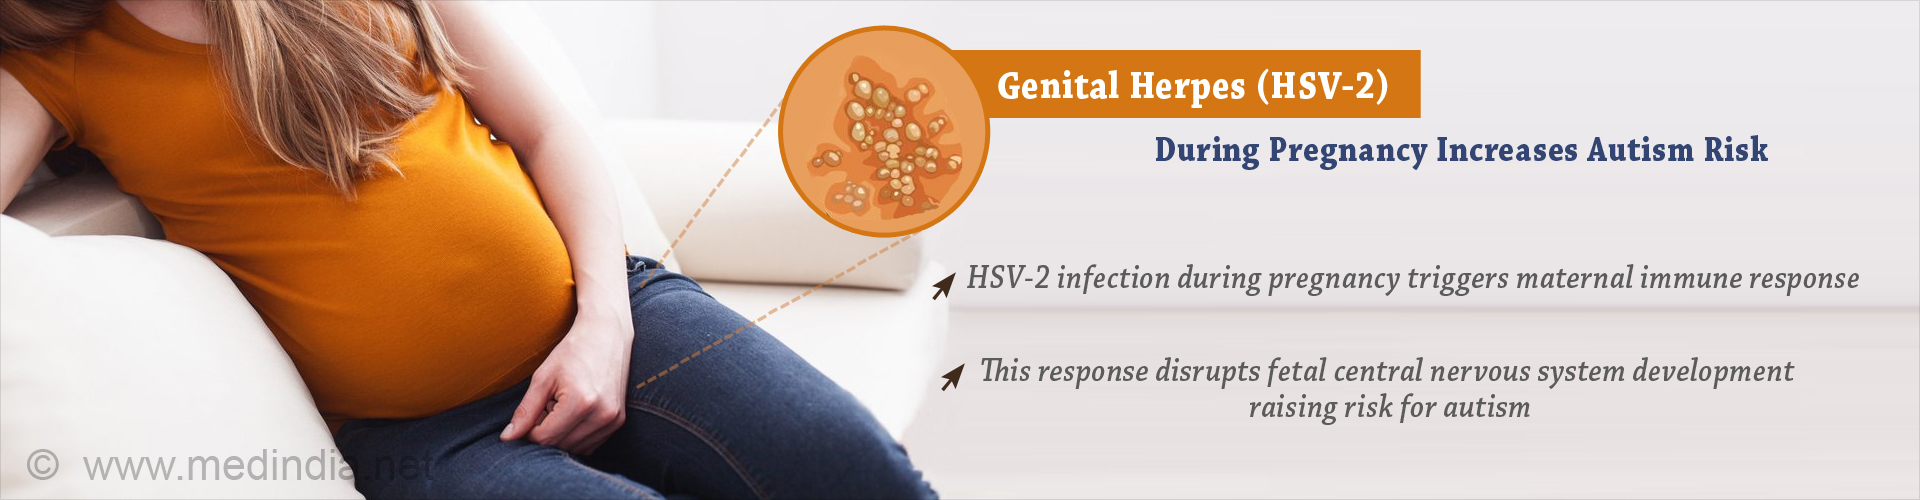 Genital Herpes (HSV-2) During Pregnancy Increases Autism Risk
- HSV-2 infection during pregnancy triggers material immune response
- This response disrupts fetal central nervous system development raising risk for autism